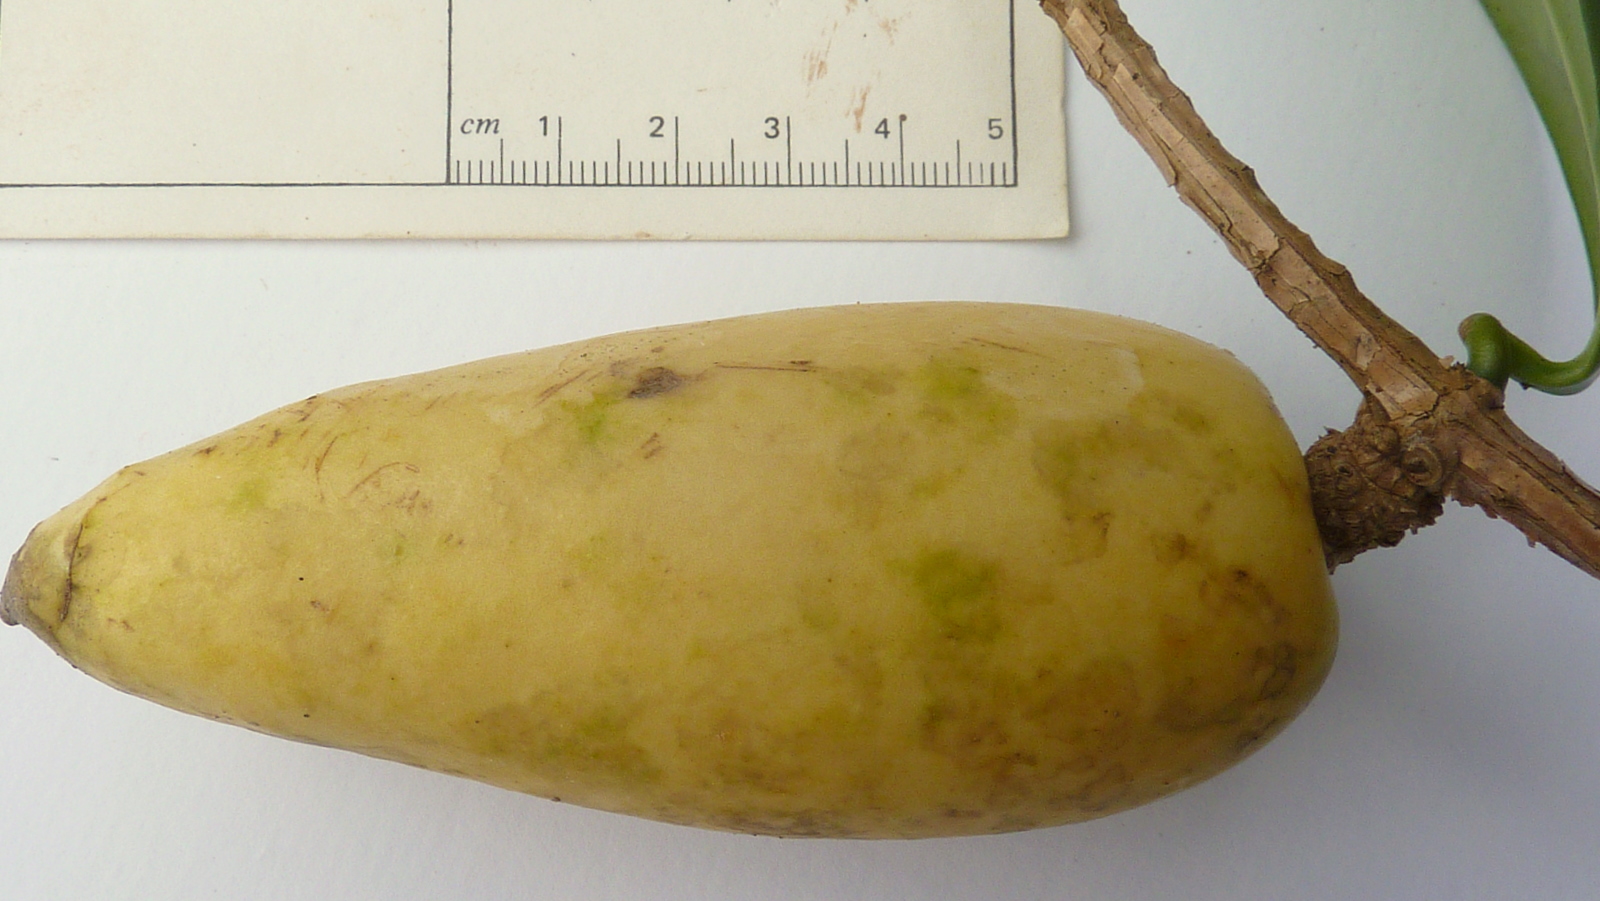 a potato has been placed next to a ruler